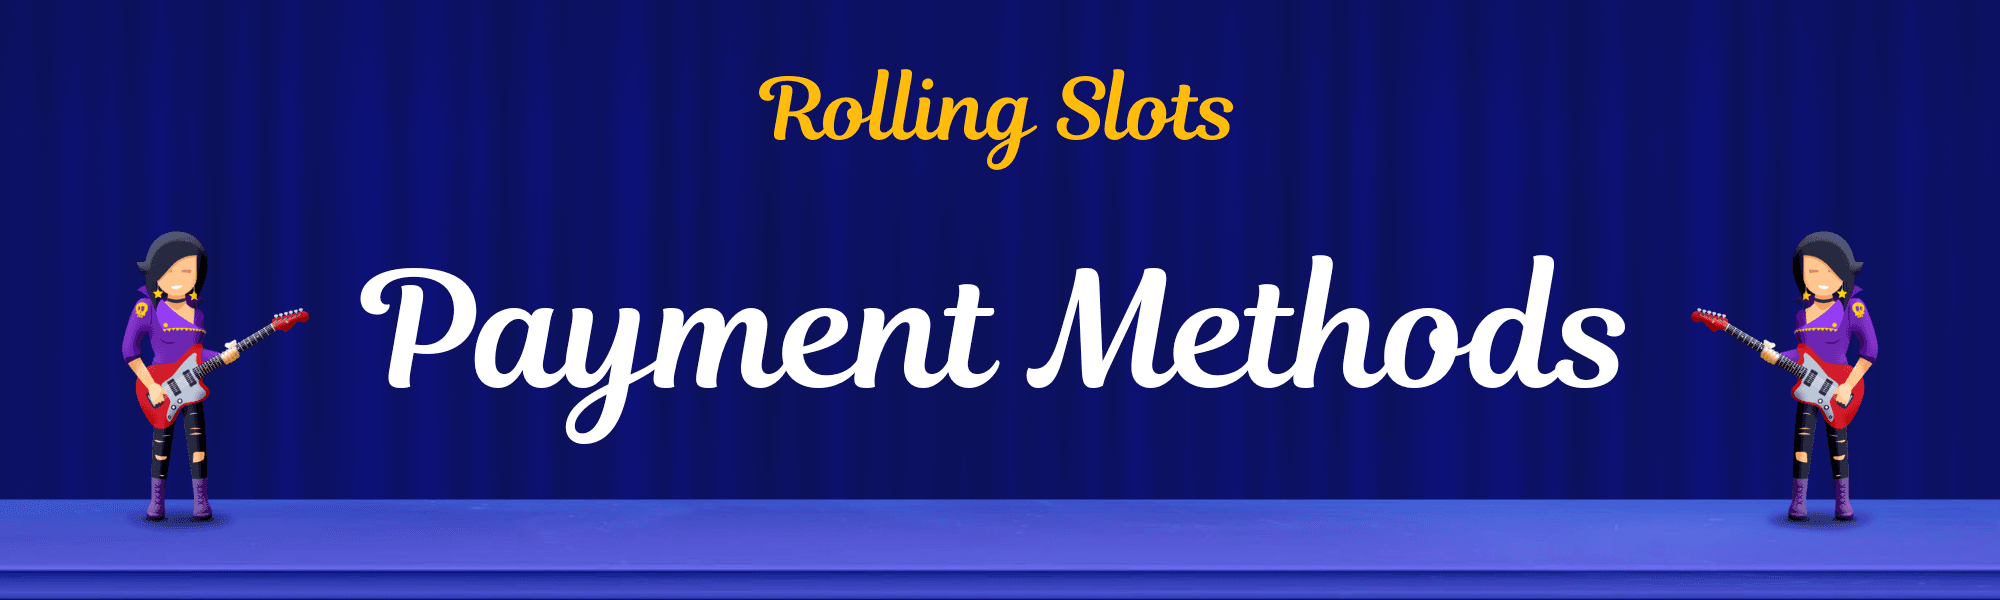 Rolling Slots Payment Methods.png